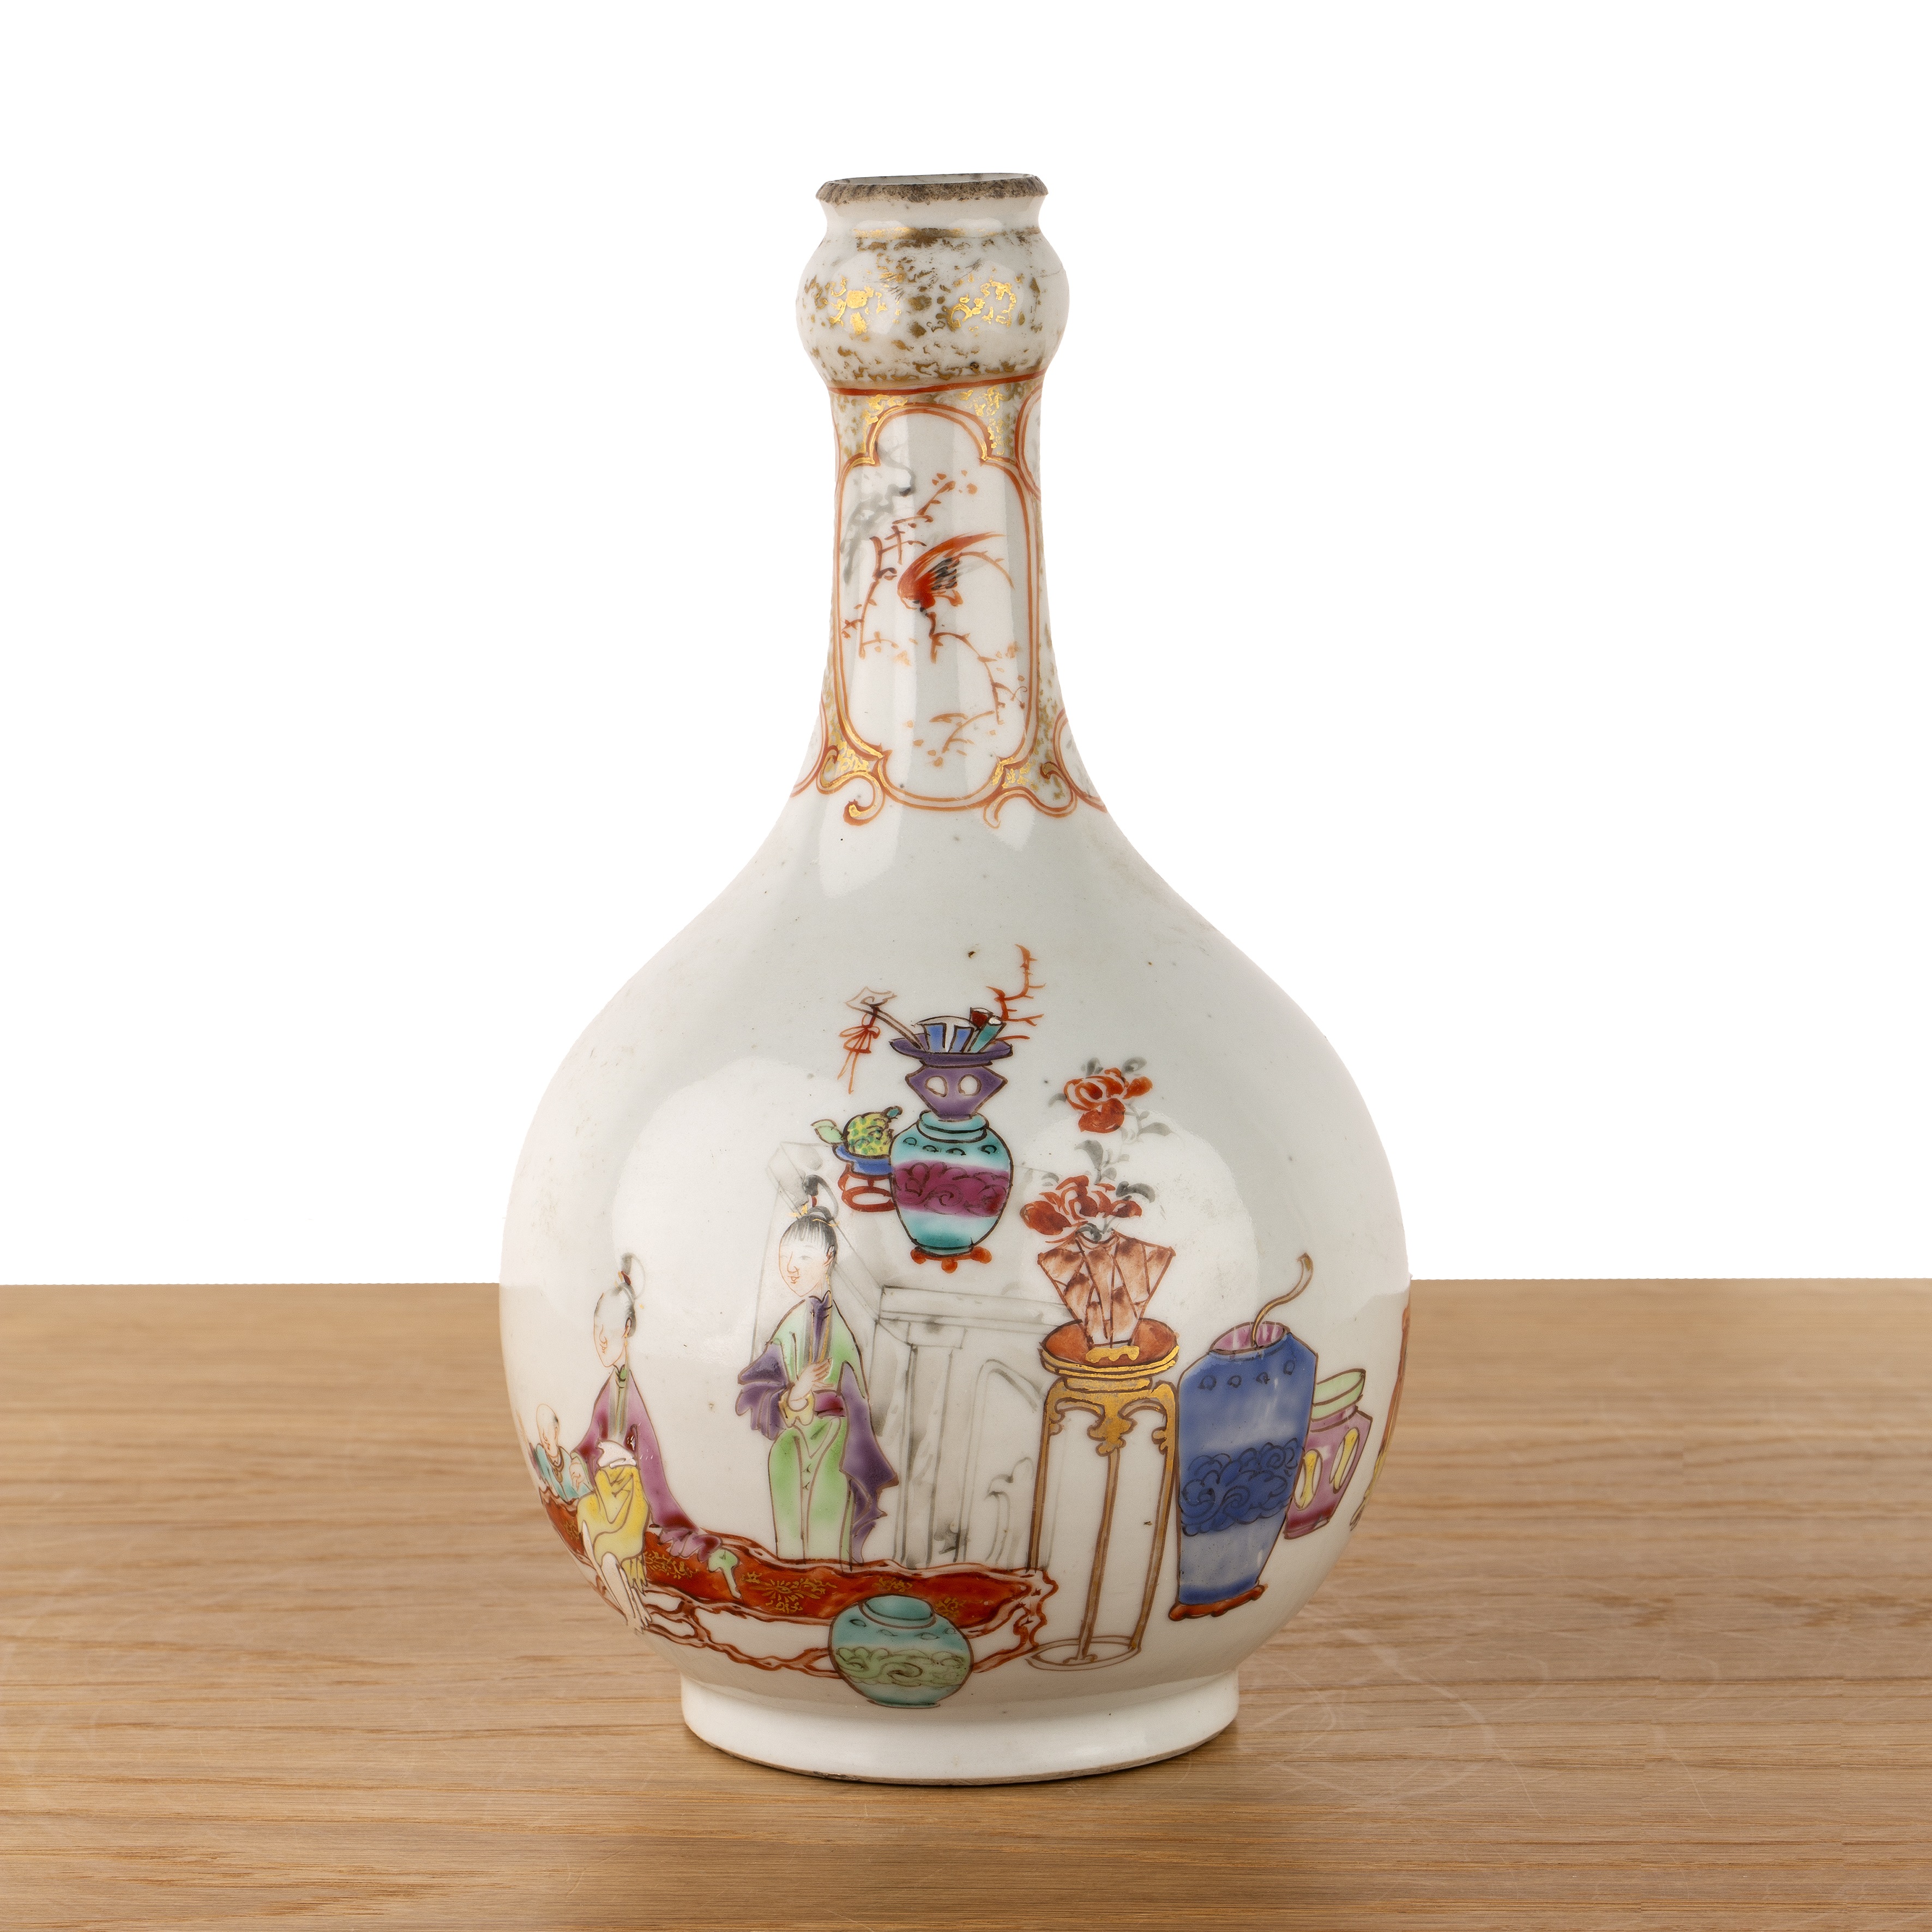 Famille rose porcelain guglet vase Chinese, late 18th Century painted with figures and a dog in an